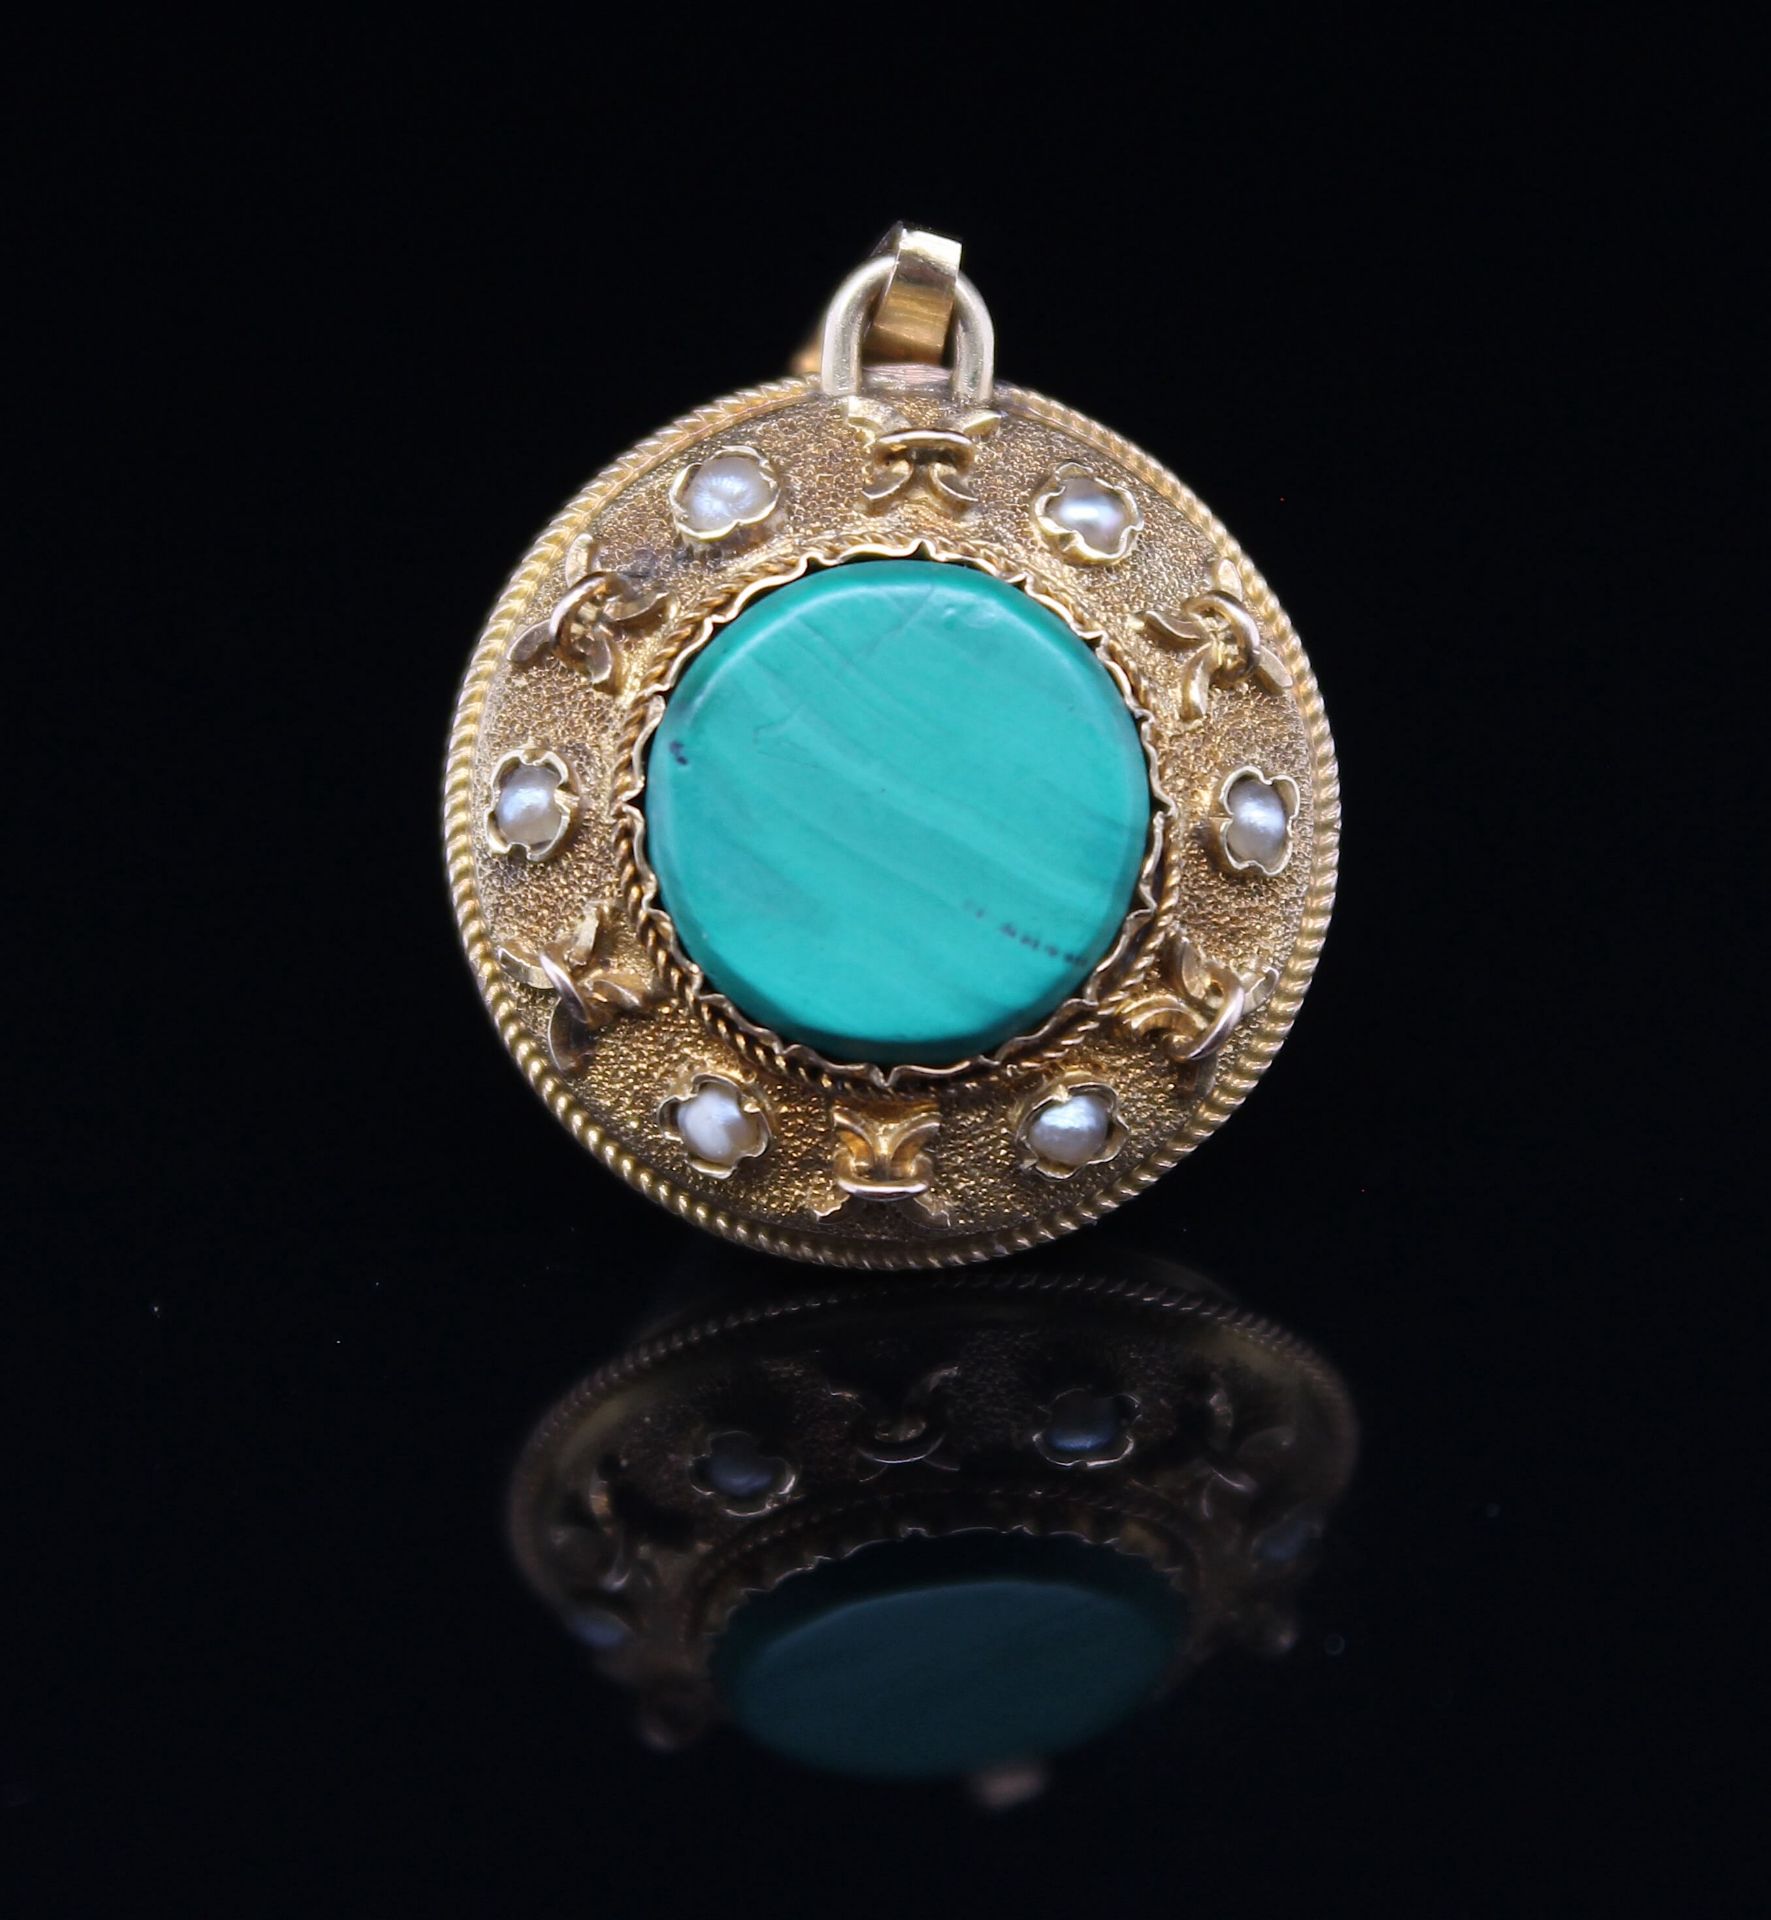 Medallion with malachite and seed pearls - Image 3 of 3